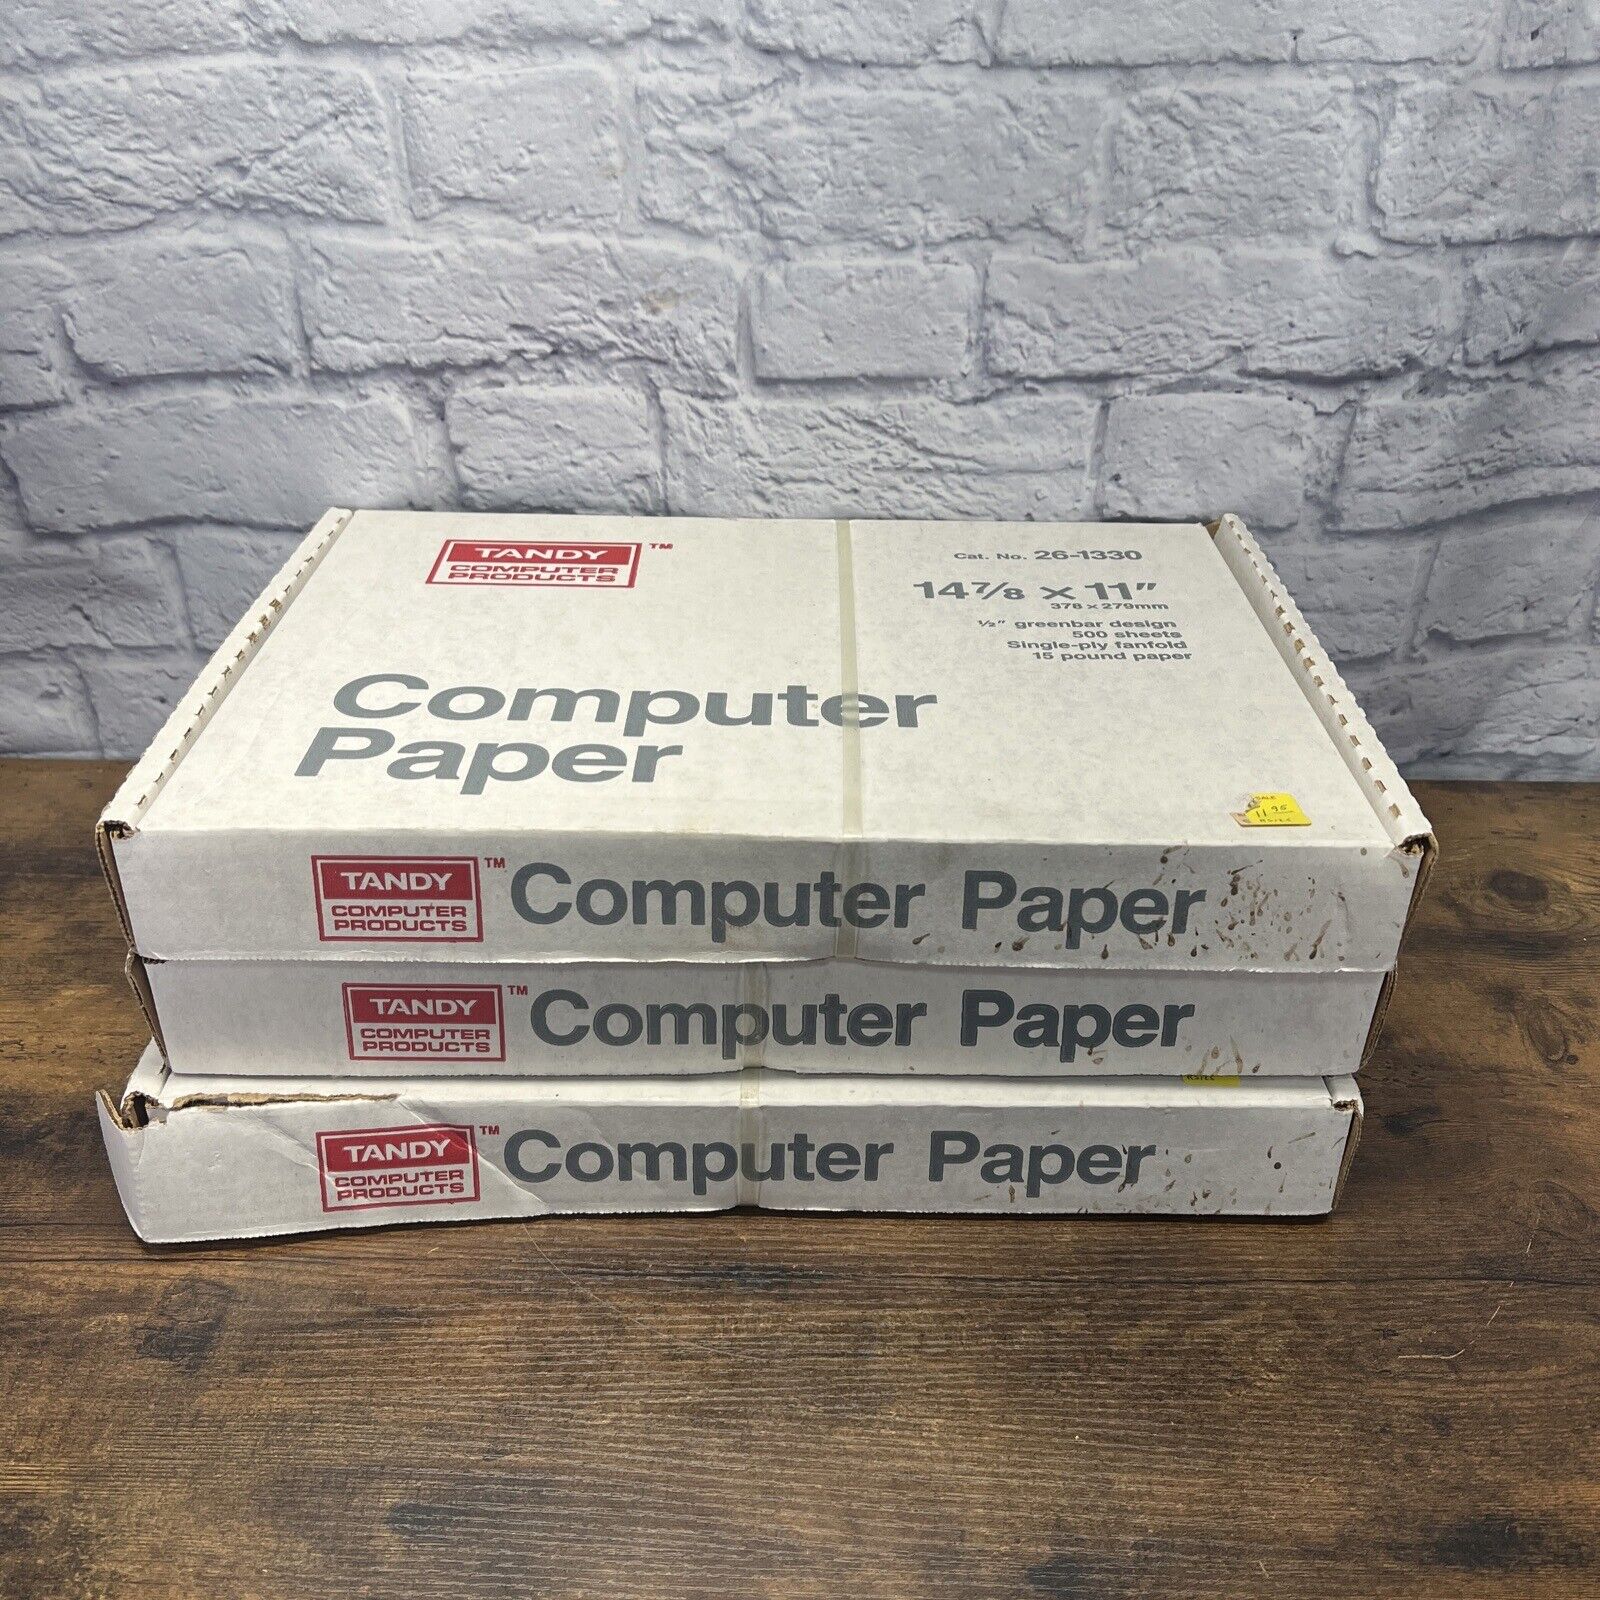 Vintage Original Tandy Computer Products Paper 26-1330 Lot Of 3 NEW SEALED